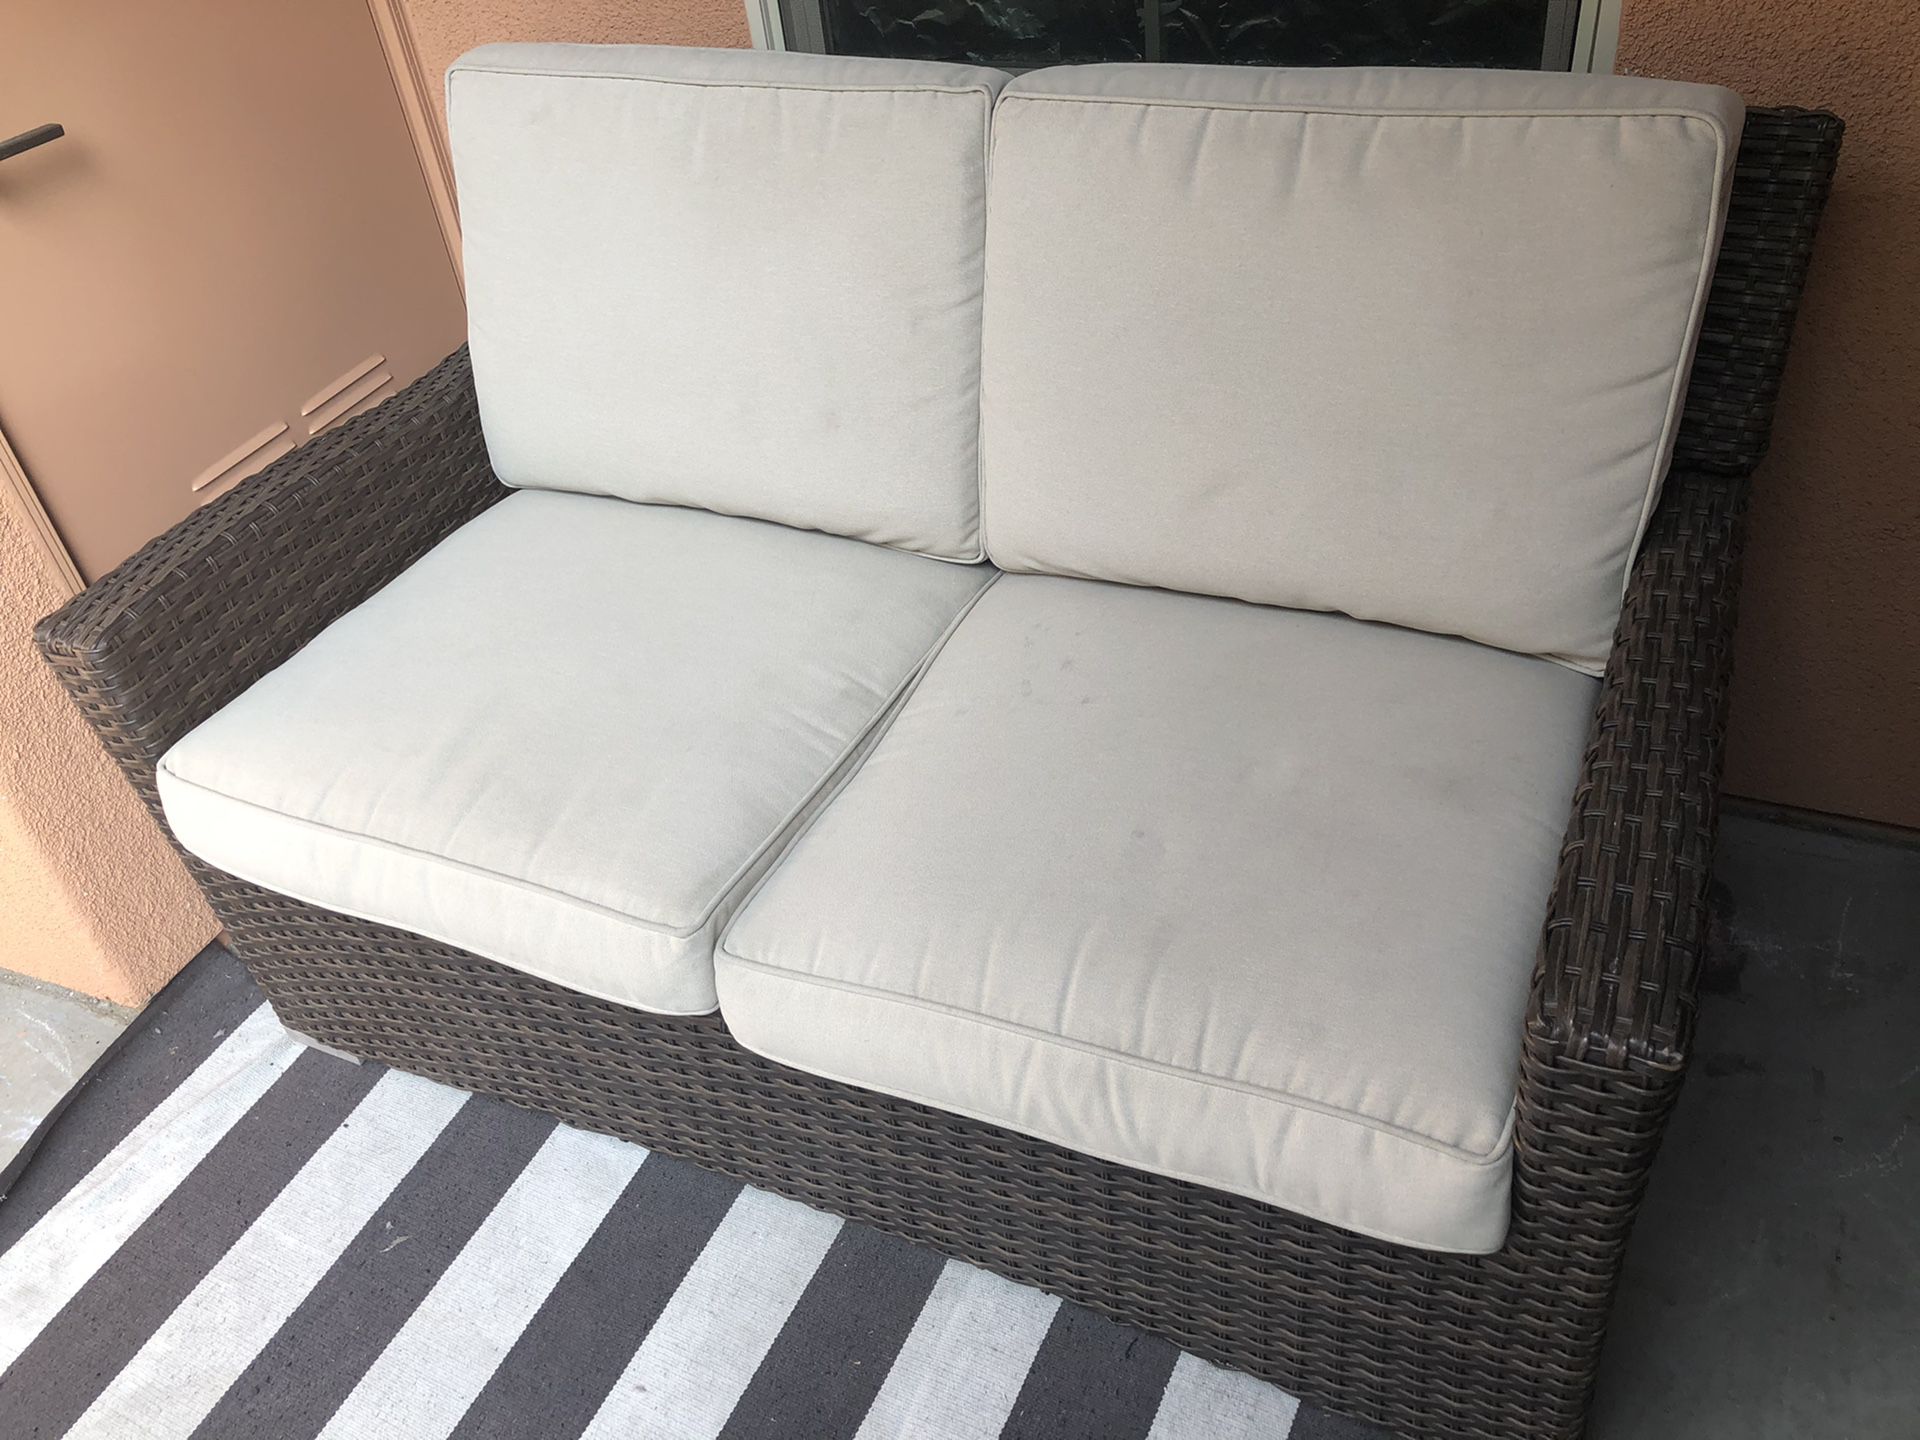 Patio/Outdoor Furniture - Wicker Loveseat from Target